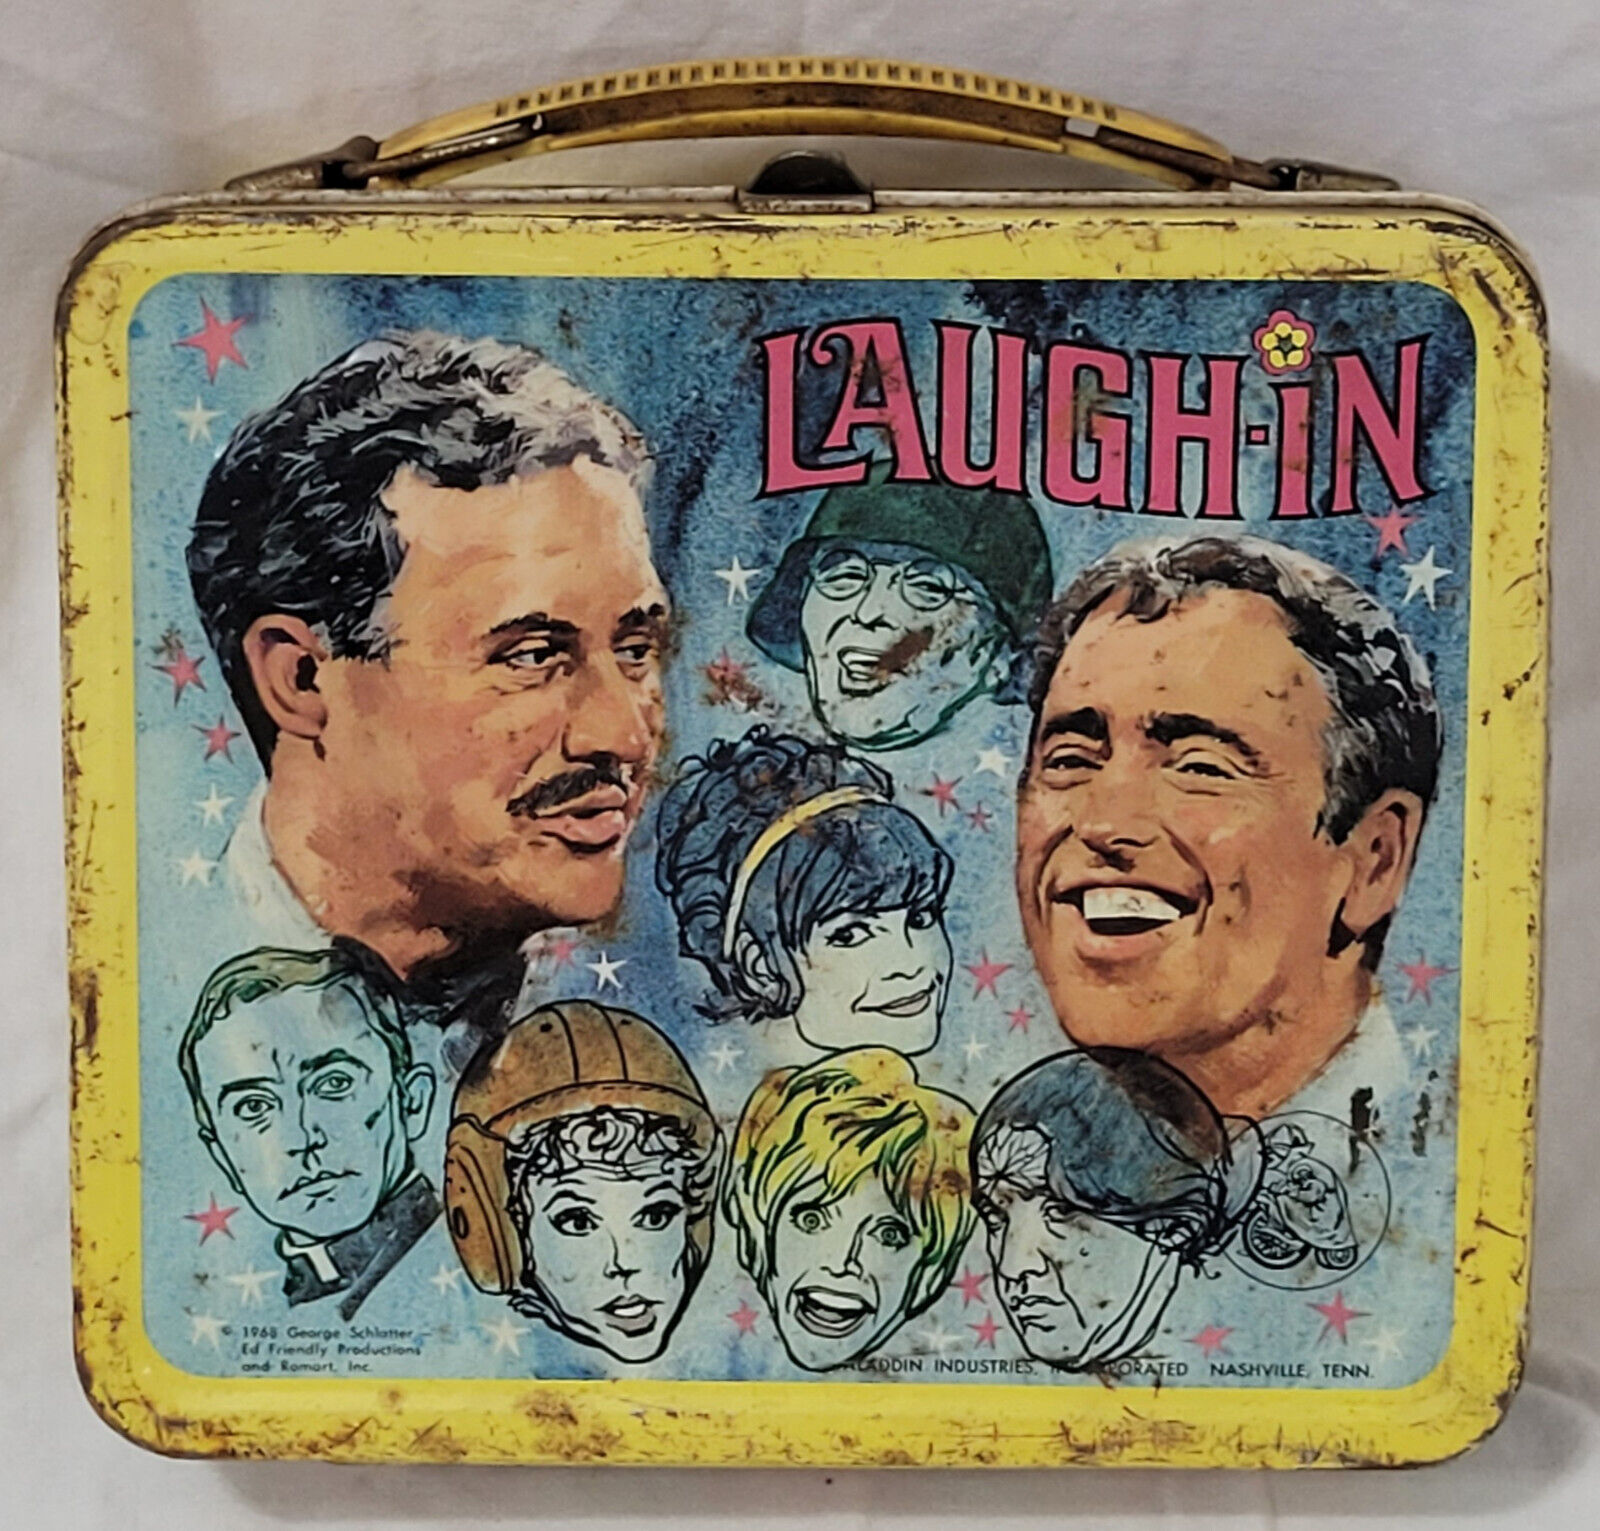 1968 Laugh-in Aladdin Metal Lunchbox Rare Vintage Laugh In